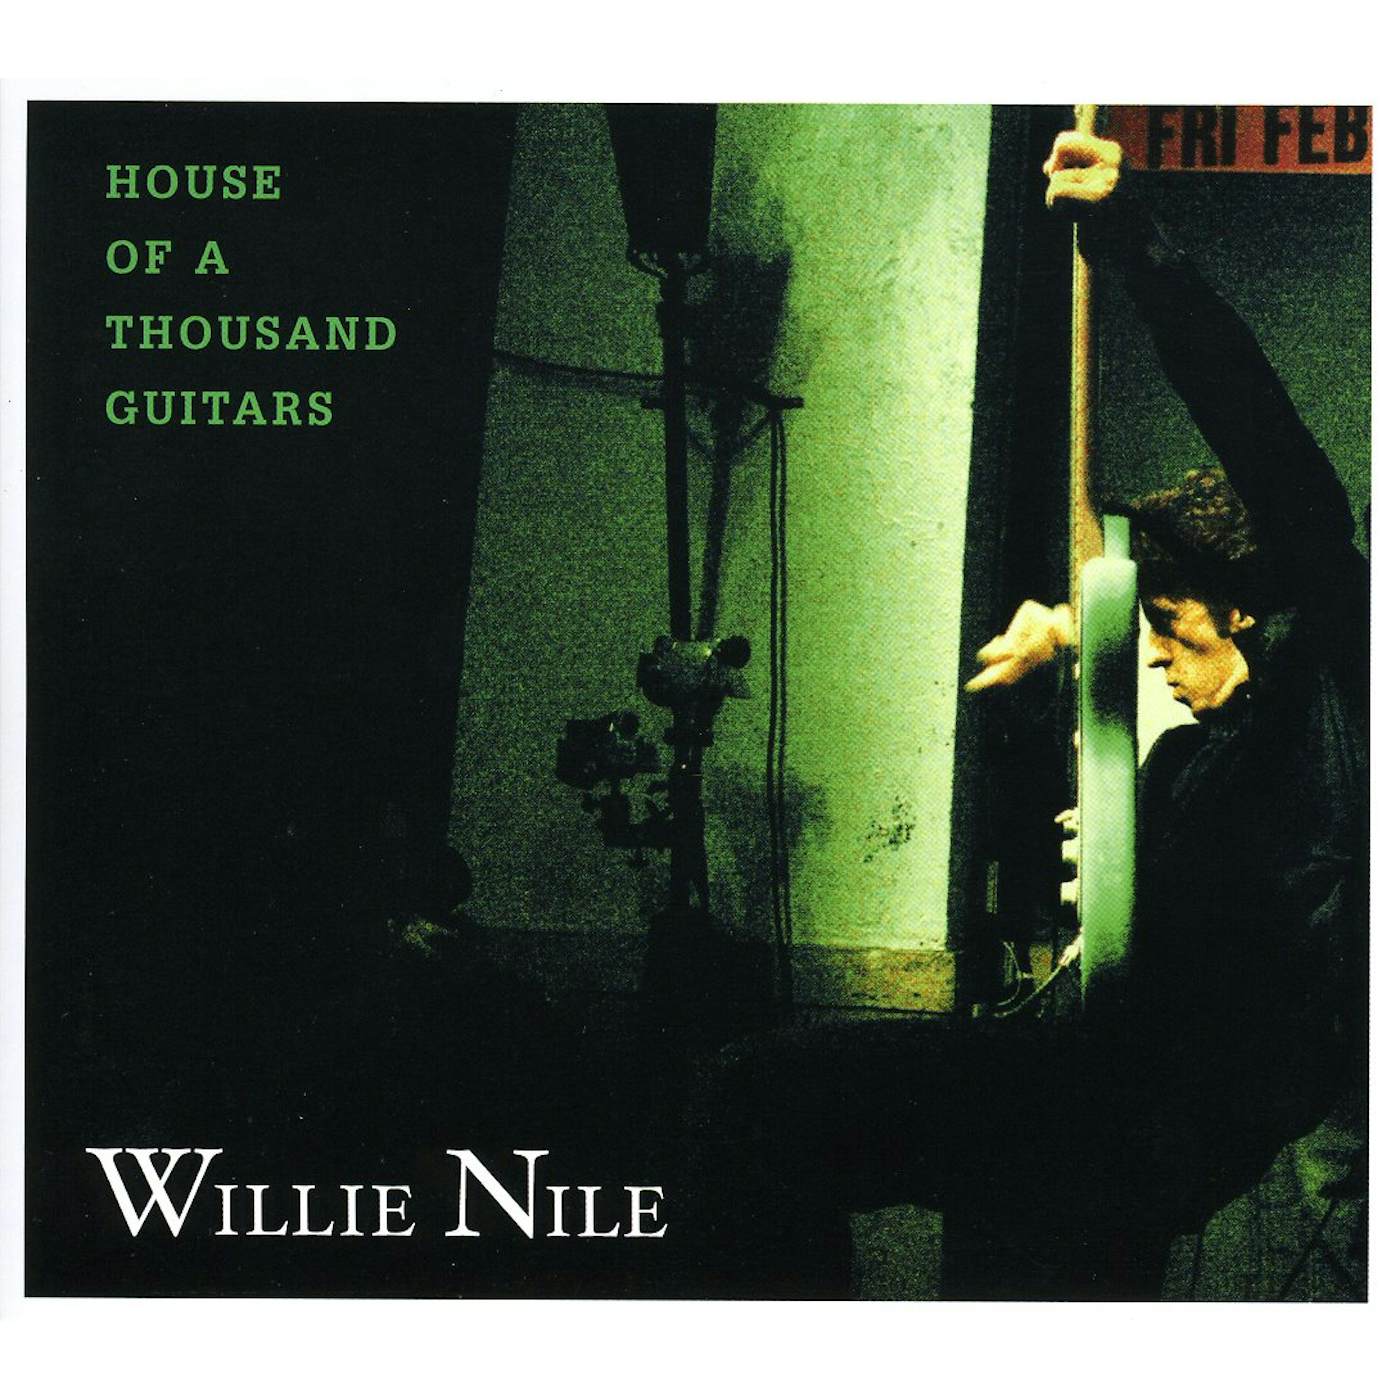 Willie Nile HOUSE OF A THOUSAND GUITARS CD